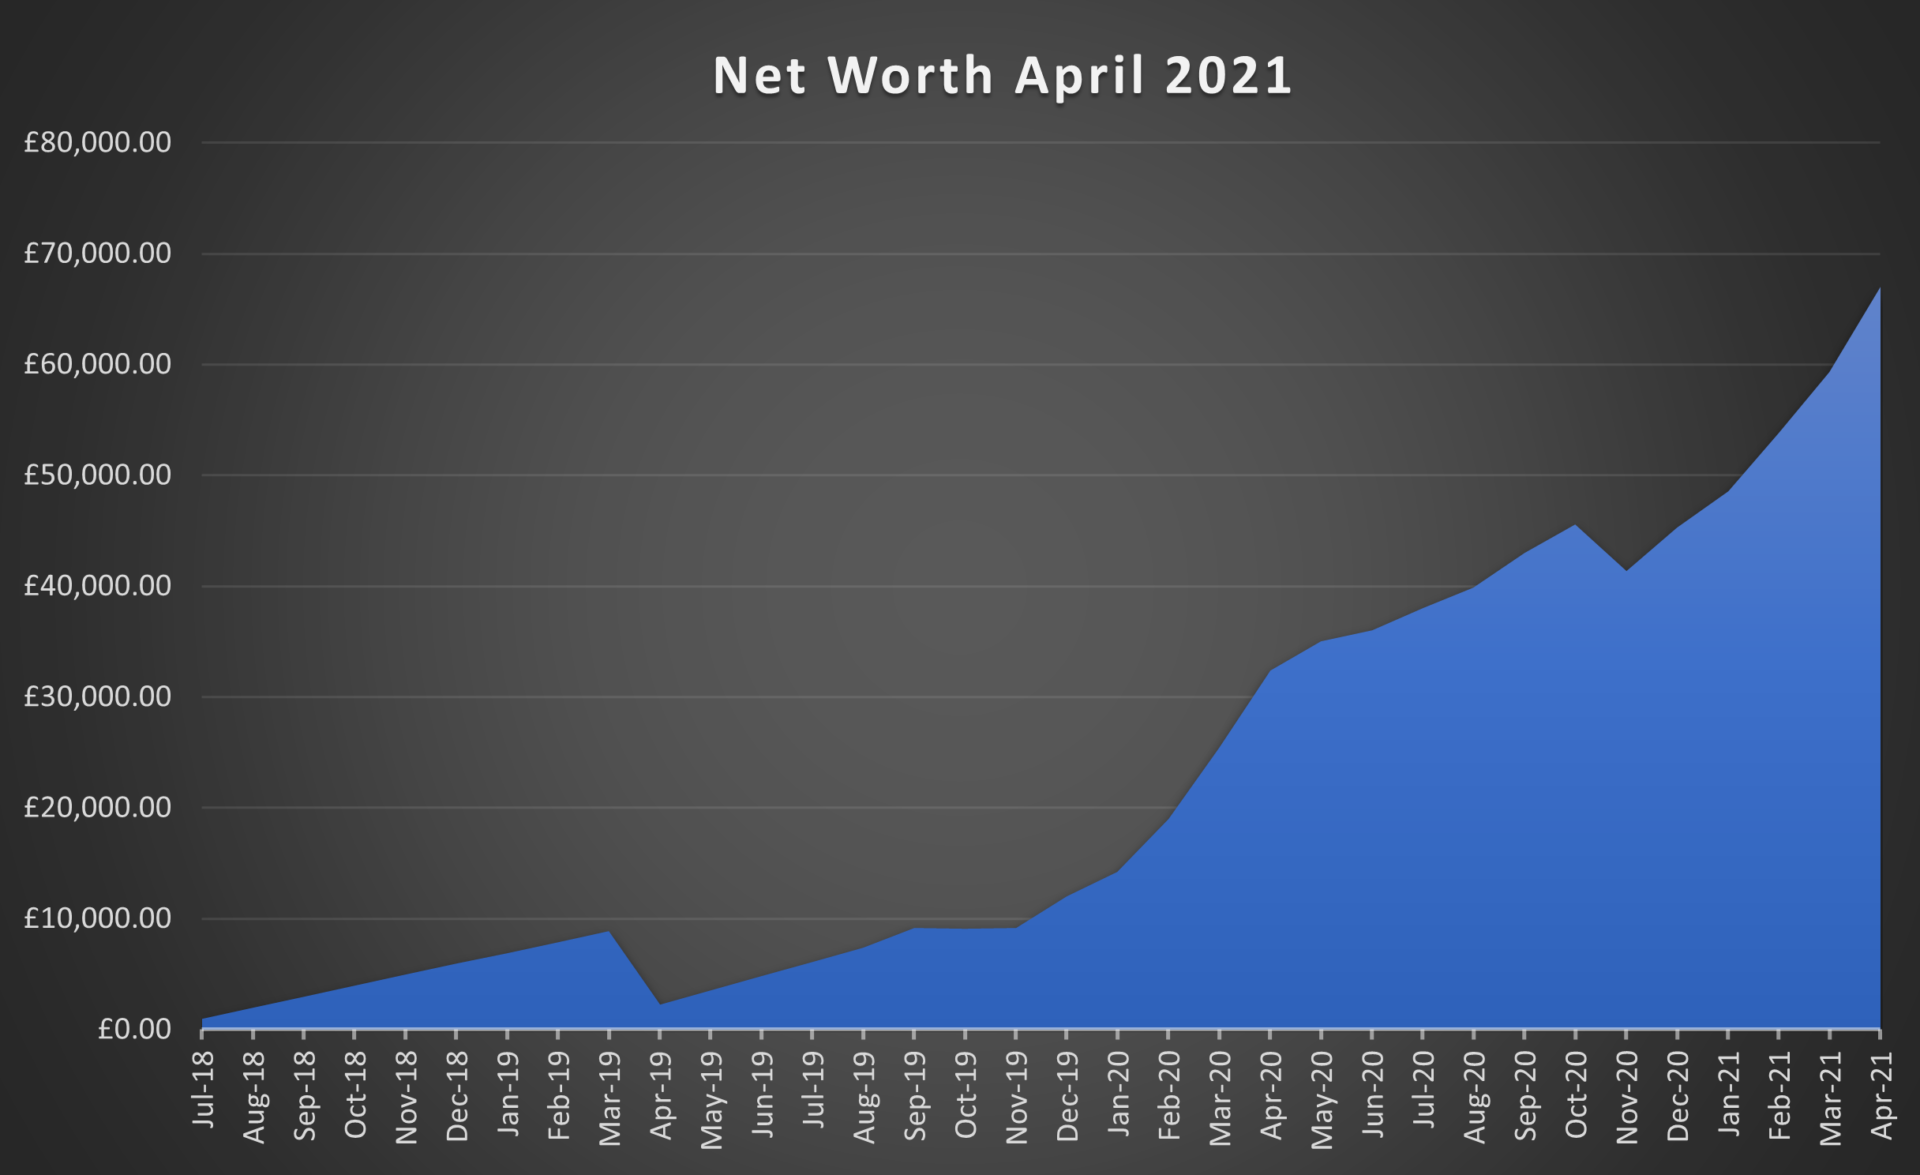 Net Worth Update for April 2021 – £67,028 (+£15,077)